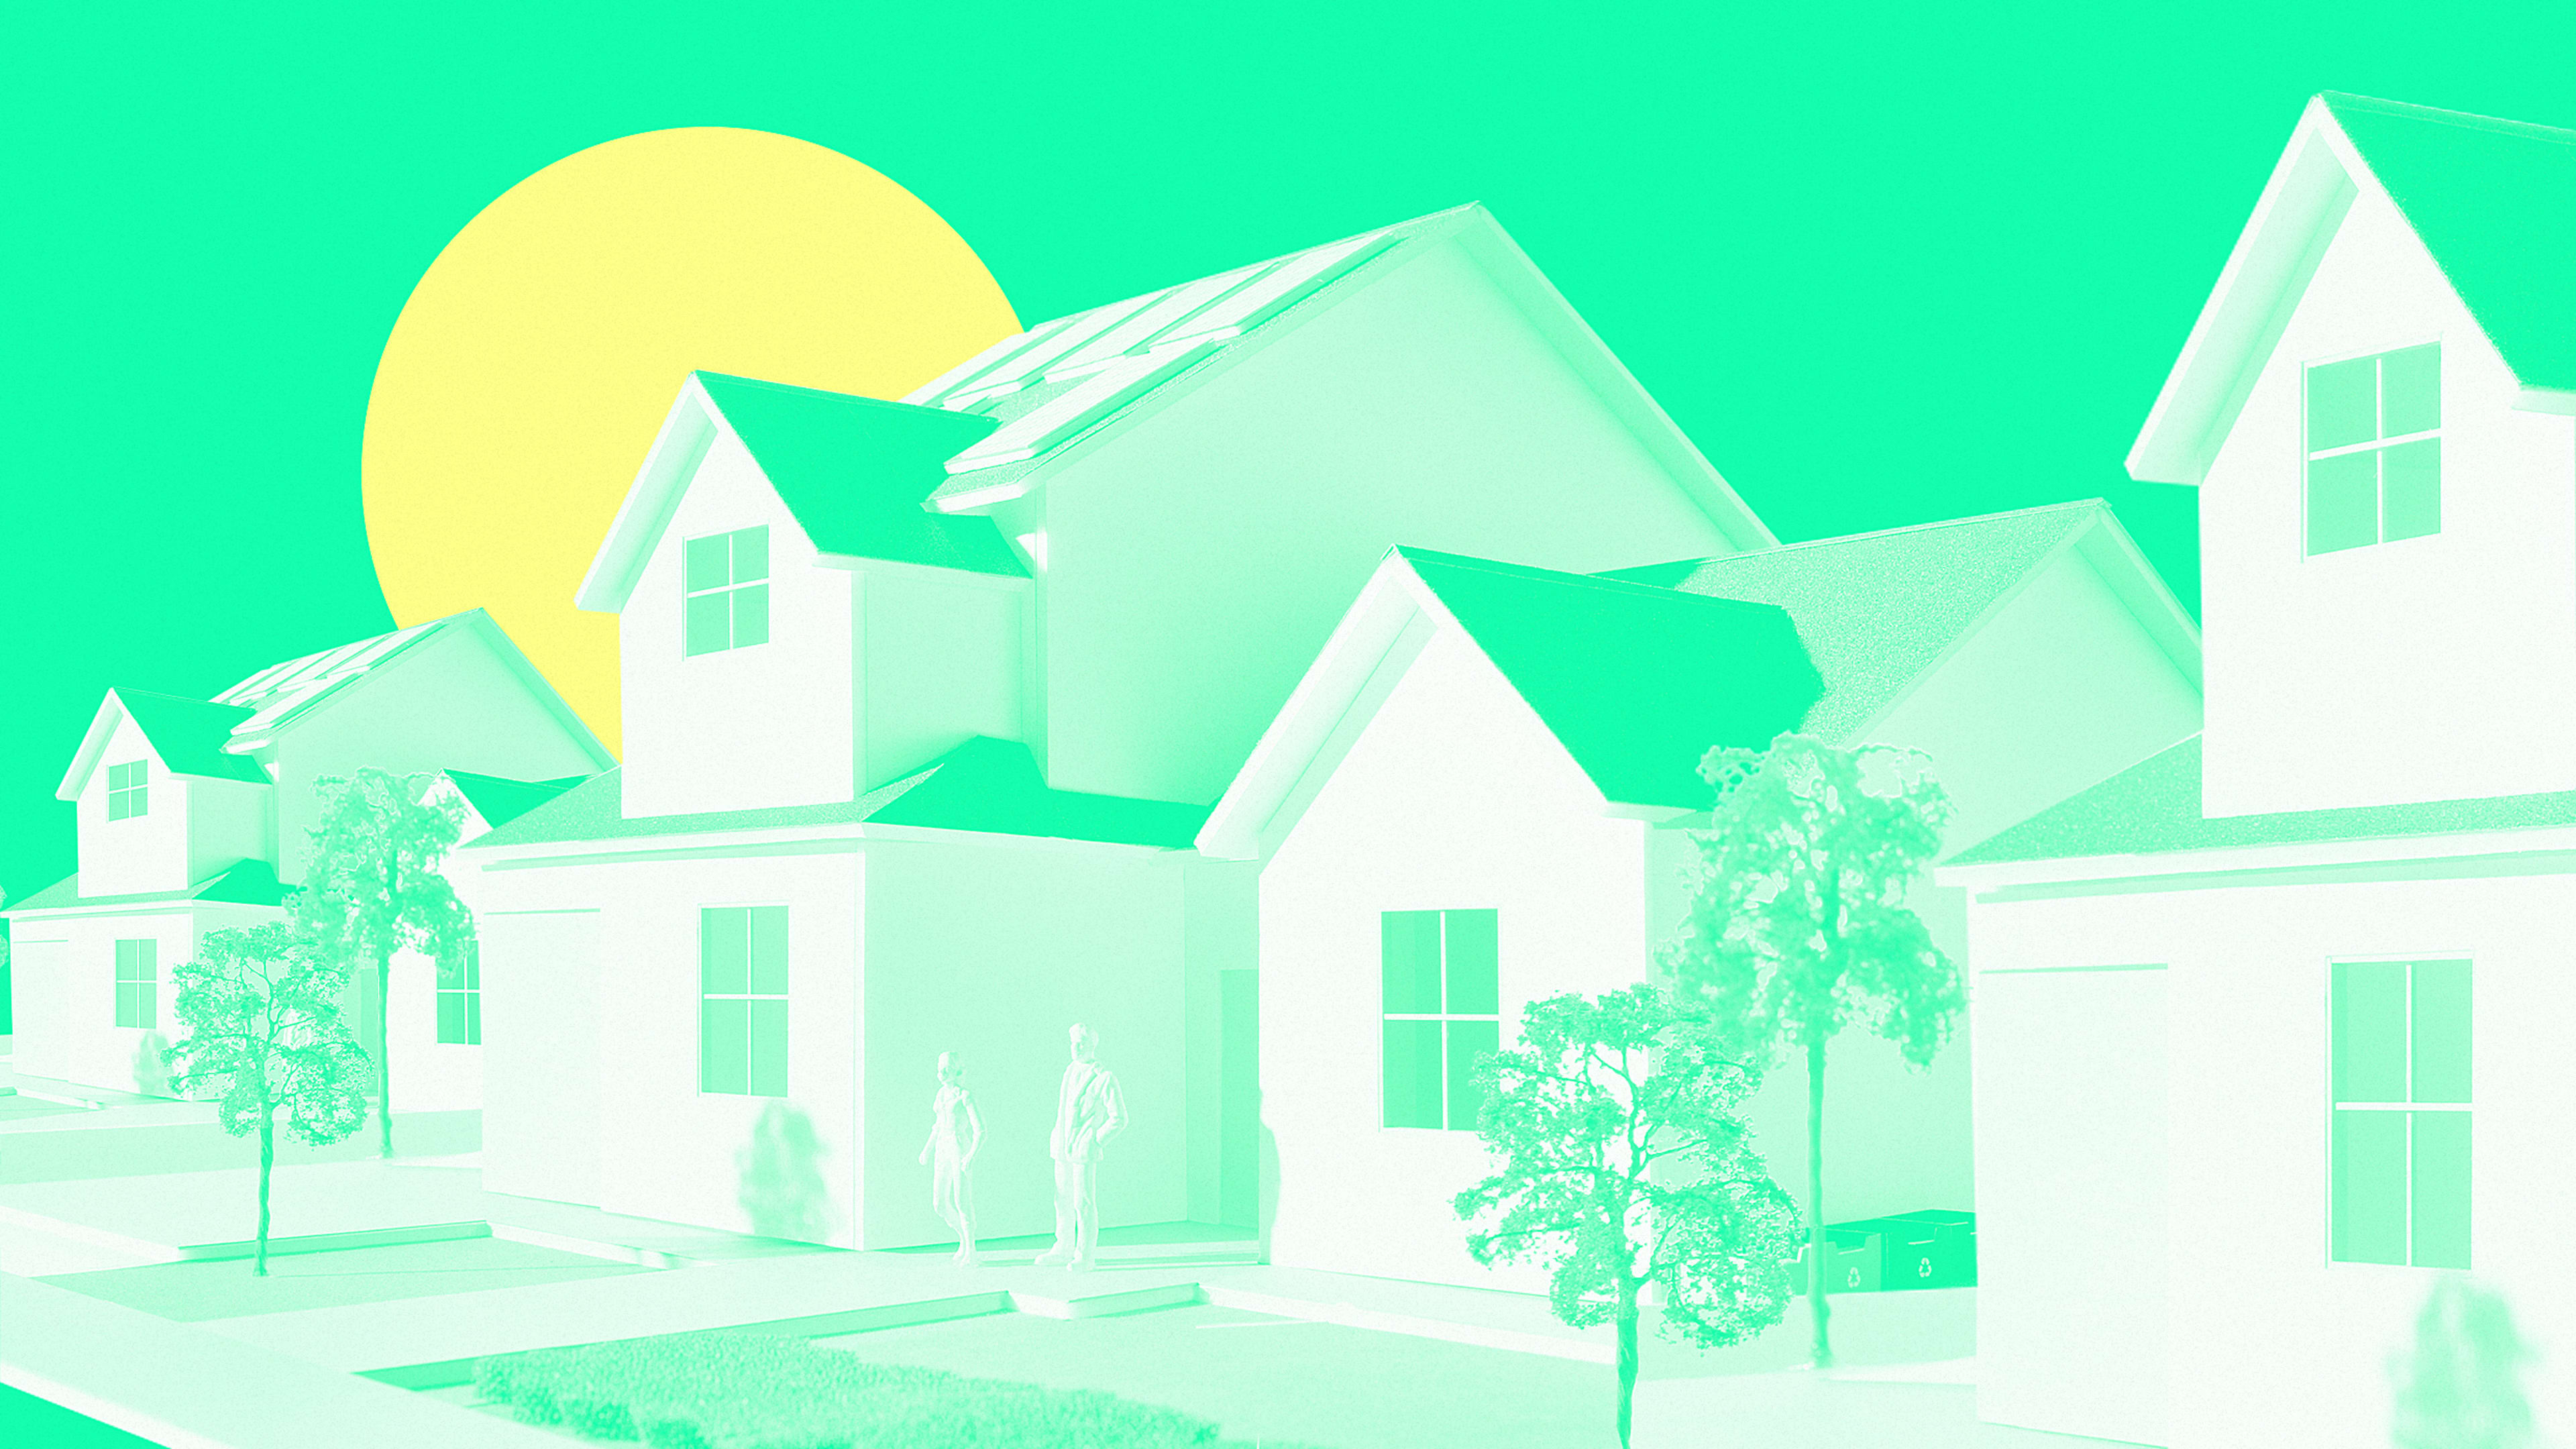 This startup will replace old, rundown homes with ones that generate more energy than they use